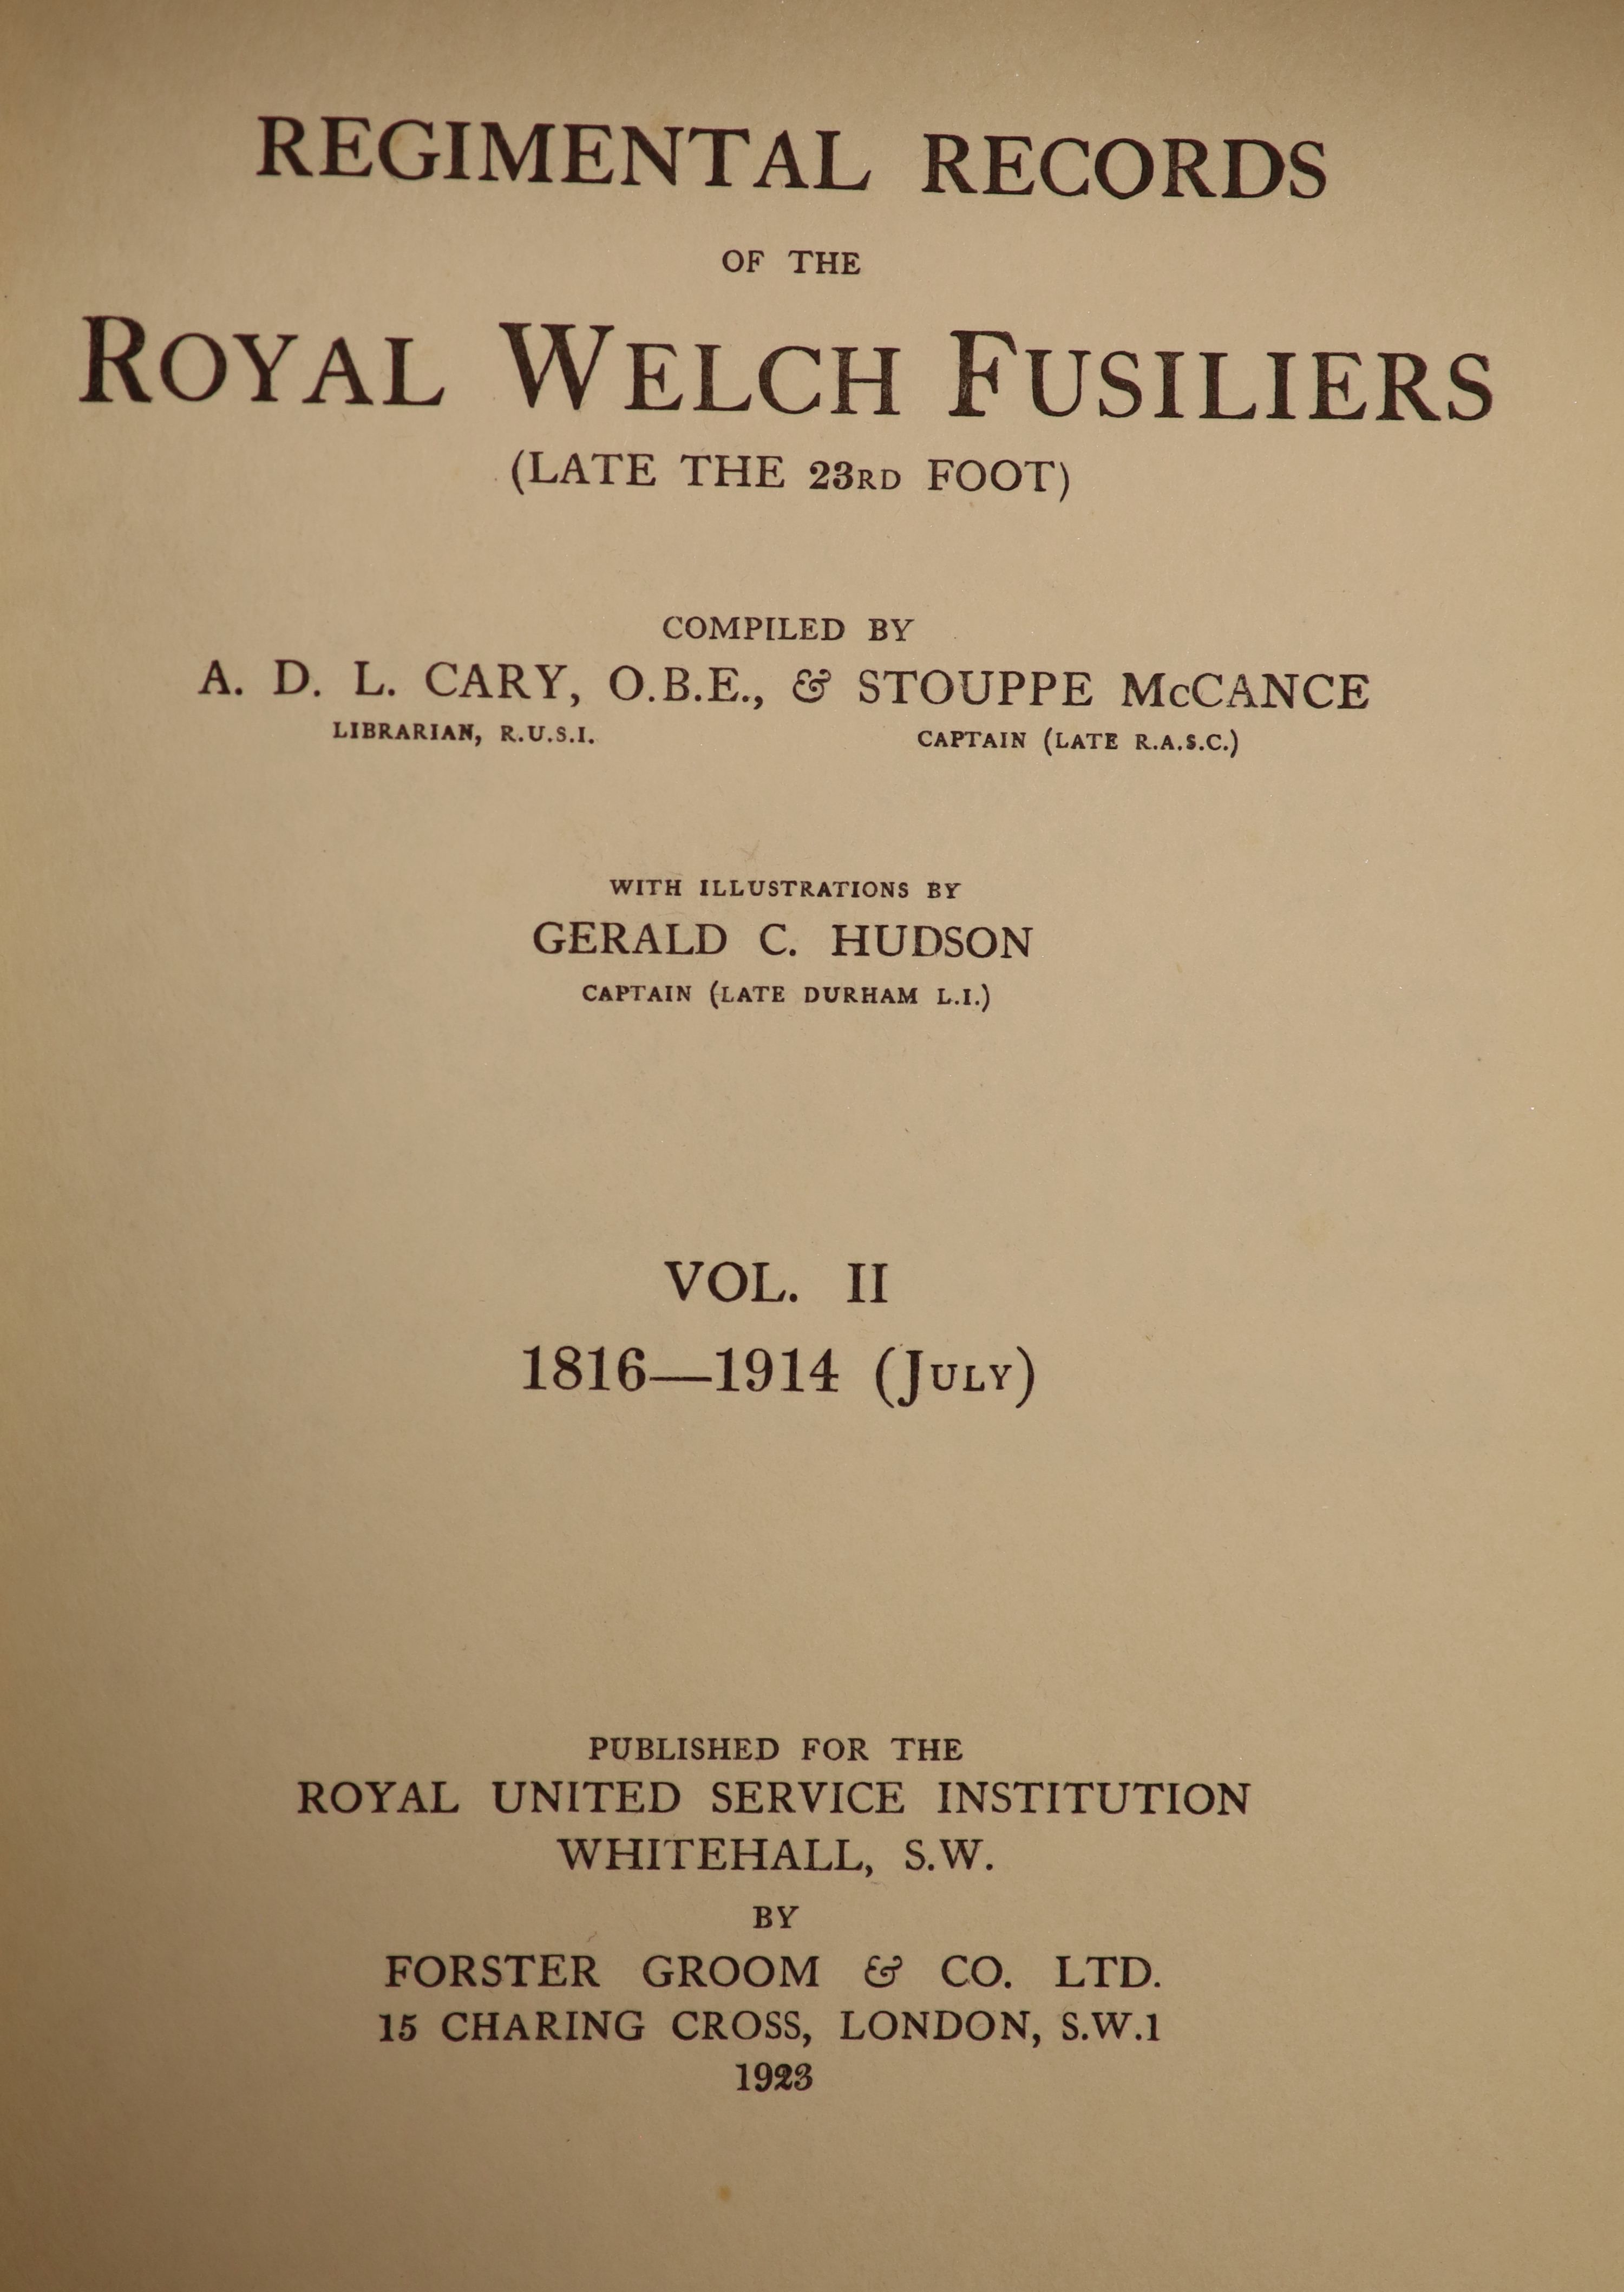 Cary, A.D.L. and McCance, S. - Regimental Records of the Royal Welch Fusiliers, Vols II, qto, blue cloth, London, 1923 and Ward, Dudley, C.H. Major, Vol III, London, 1928, together with 7 other works relating to regiment